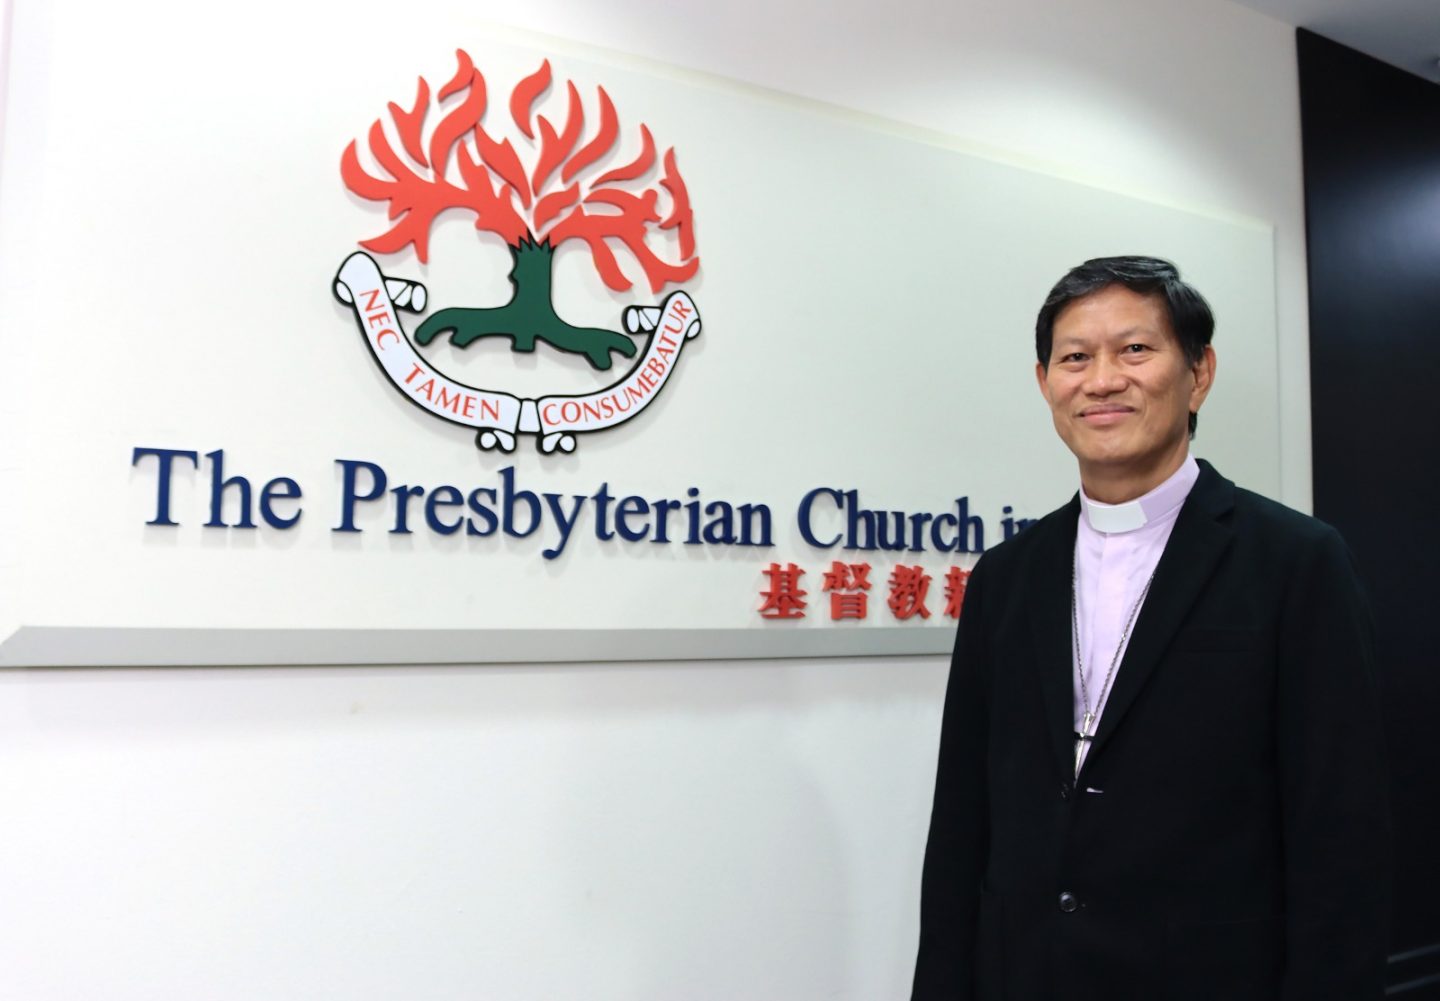 Rev Keith Lai, who is also the Synod moderator at the Presbyterian Church of Singapore, will be taking over Bishop Terry Kee as president of NCCS. Photo courtesy of Rev Keith Lai.